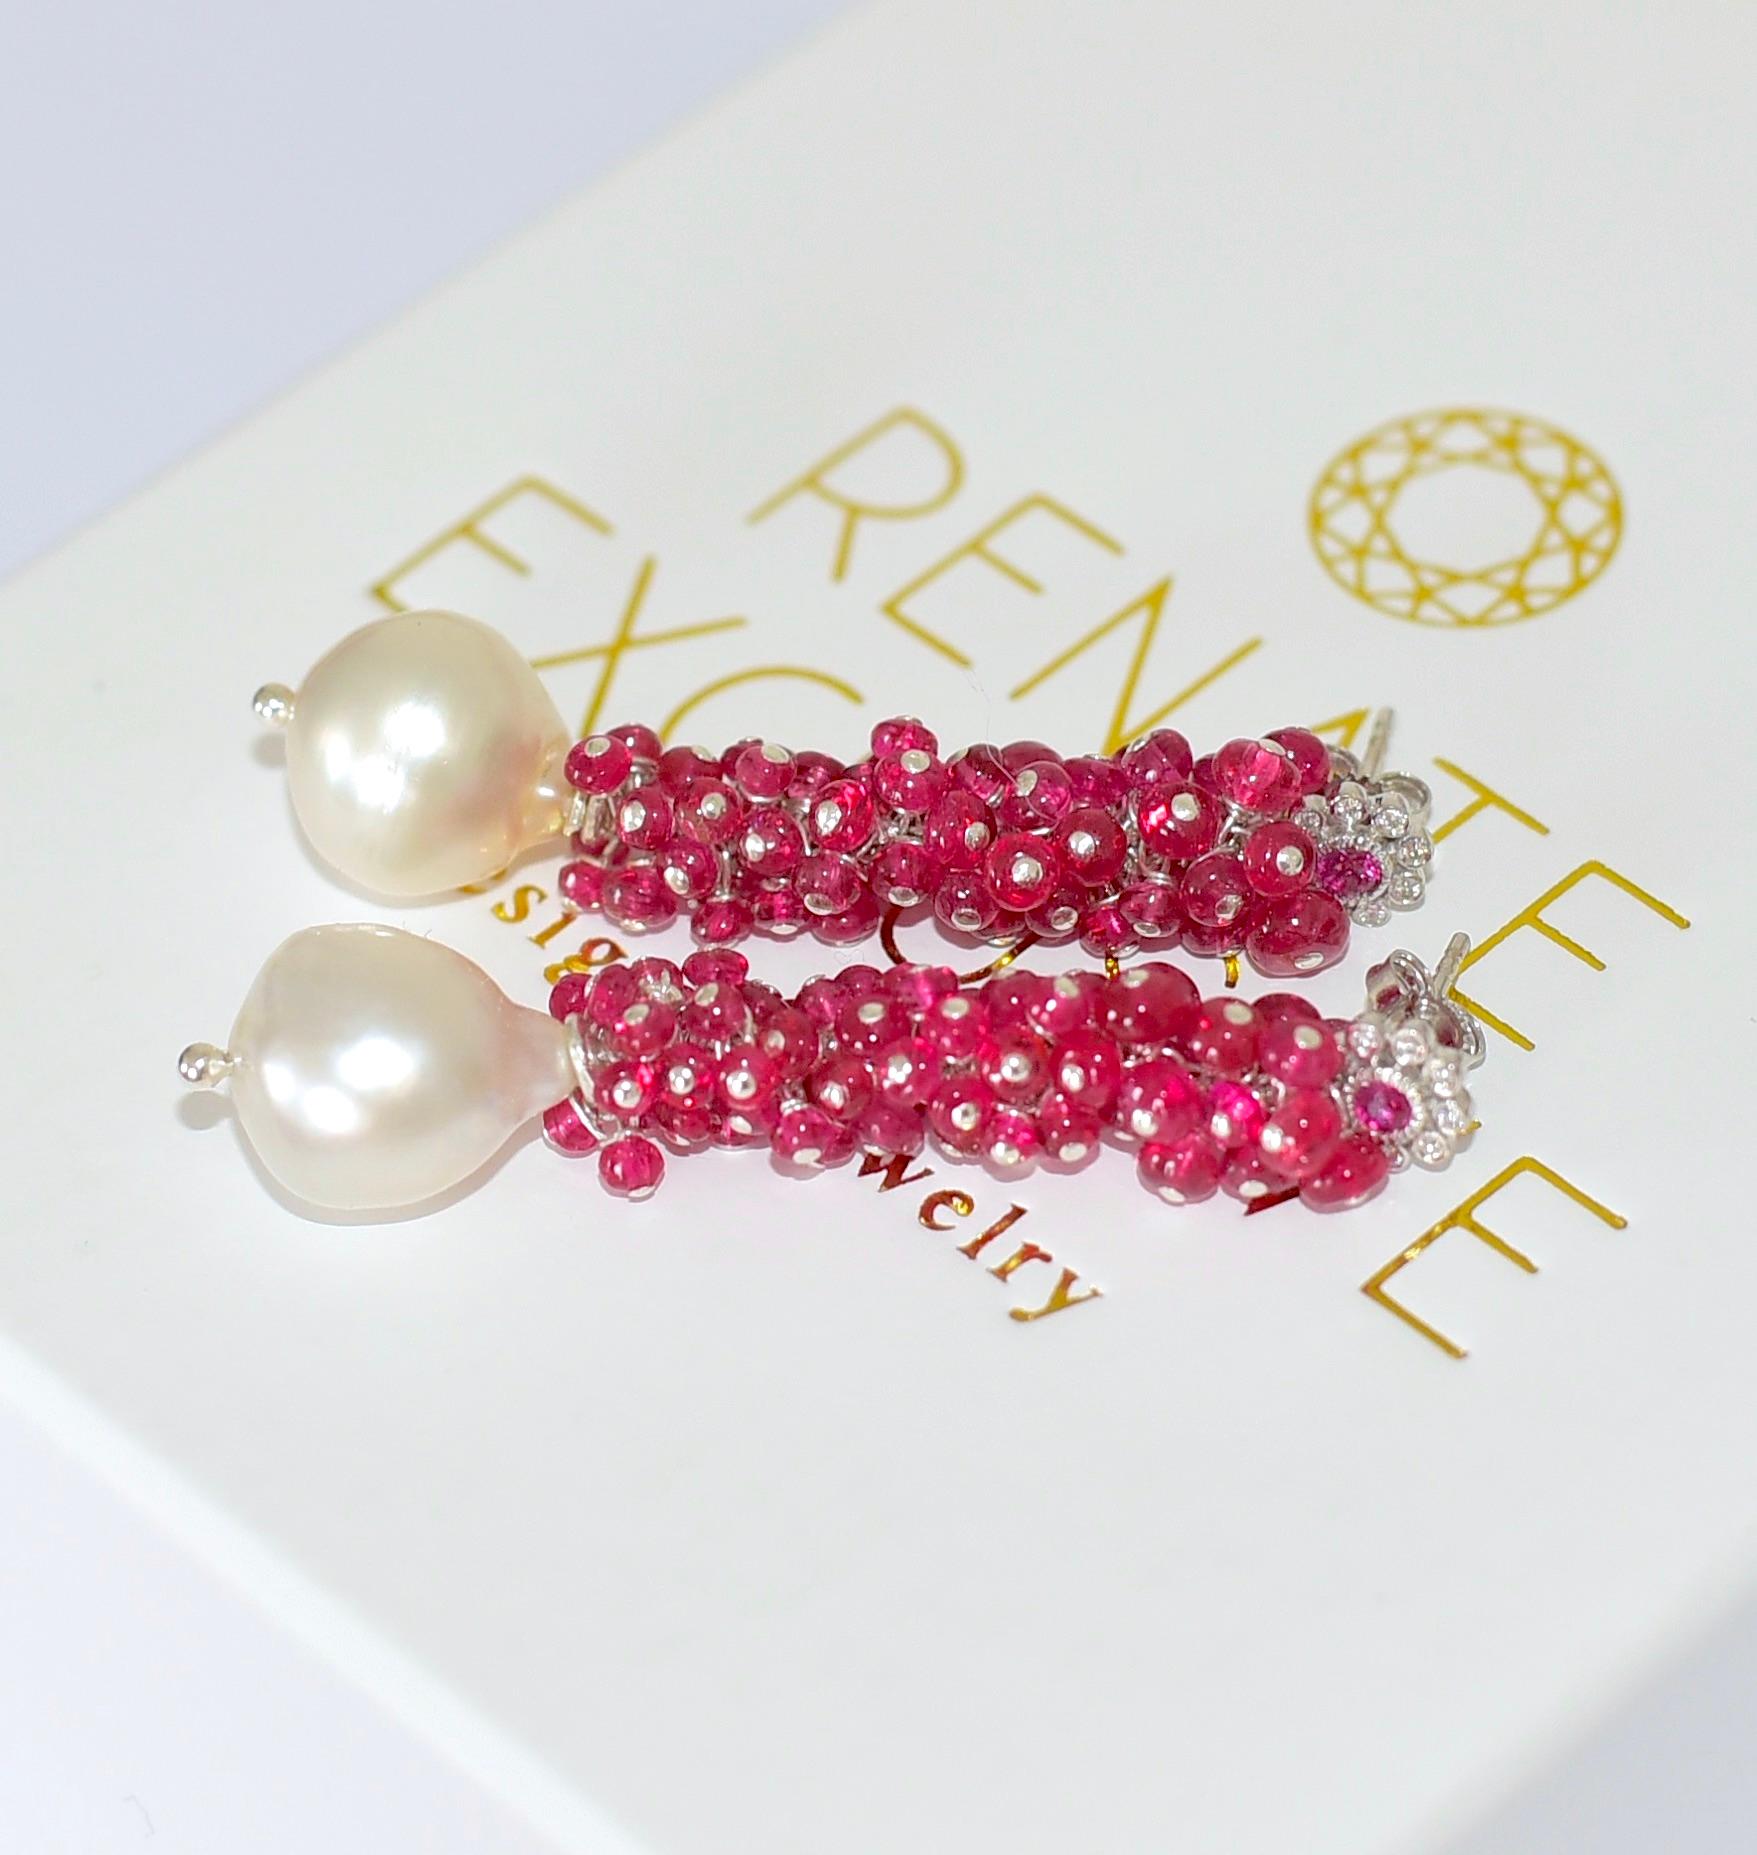 Bead  Ruby Red Burmese Spinel, South Sea Pearl Earrings in 14K Solid White Gold